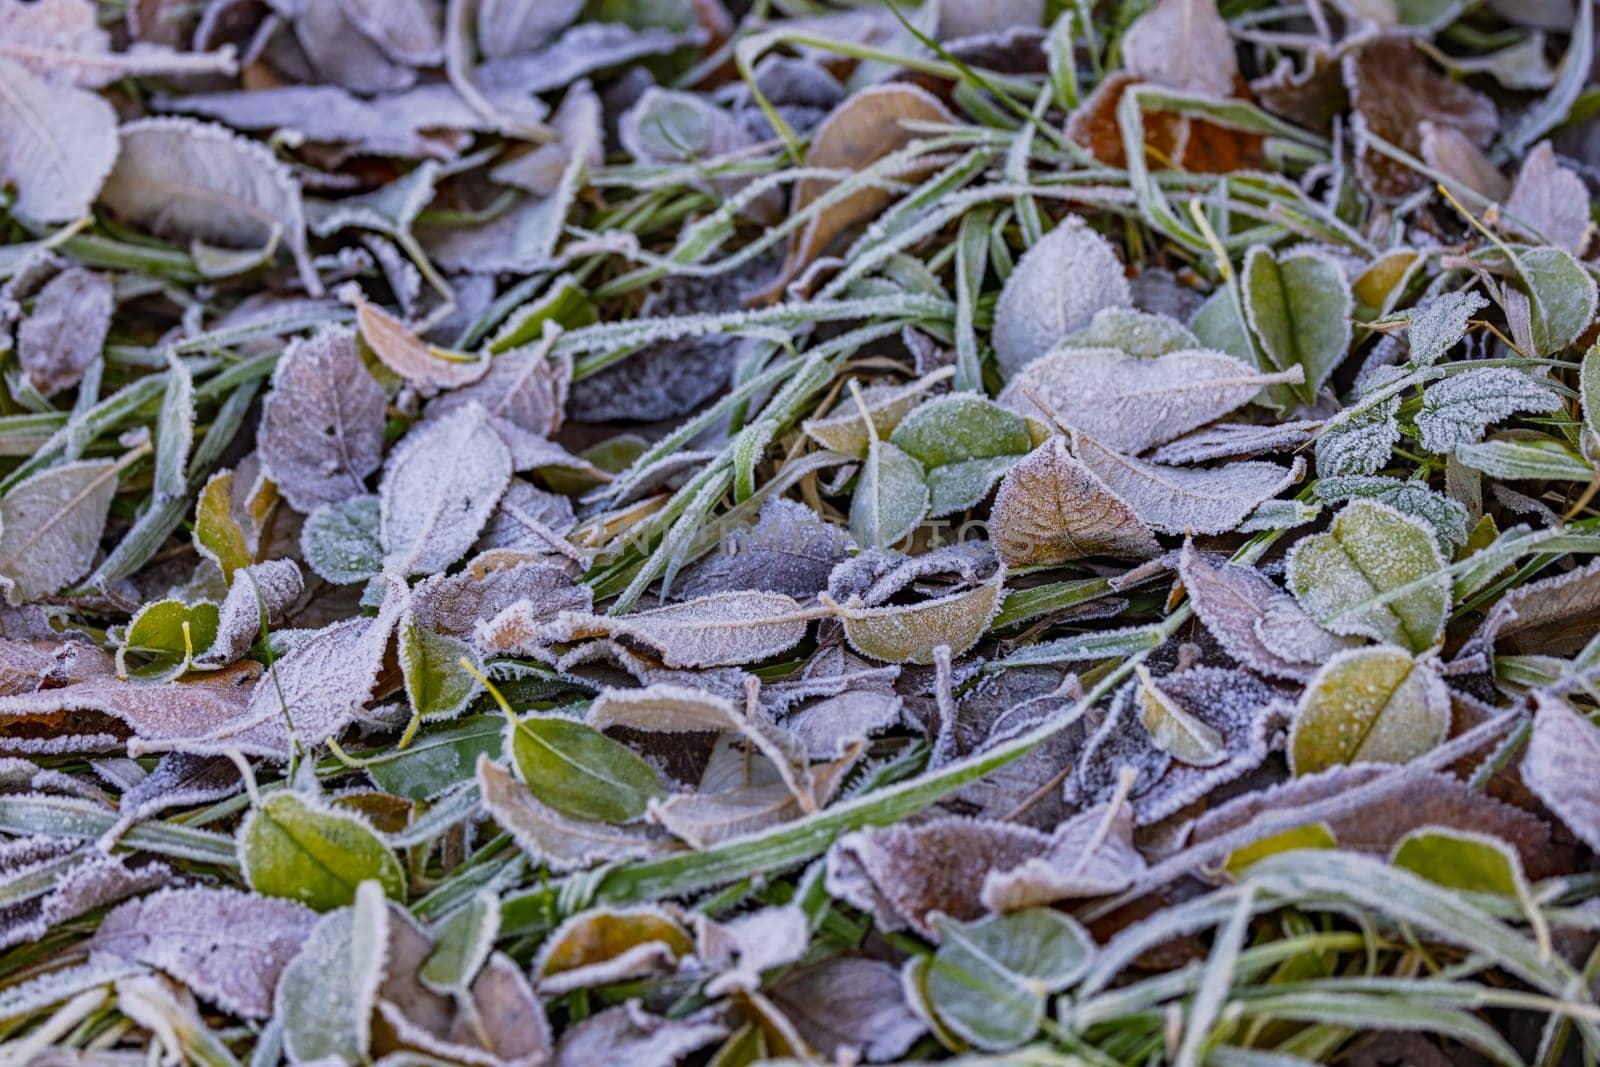 Ice crystals on colorful fallen leaves in cold and frosty weather in winter